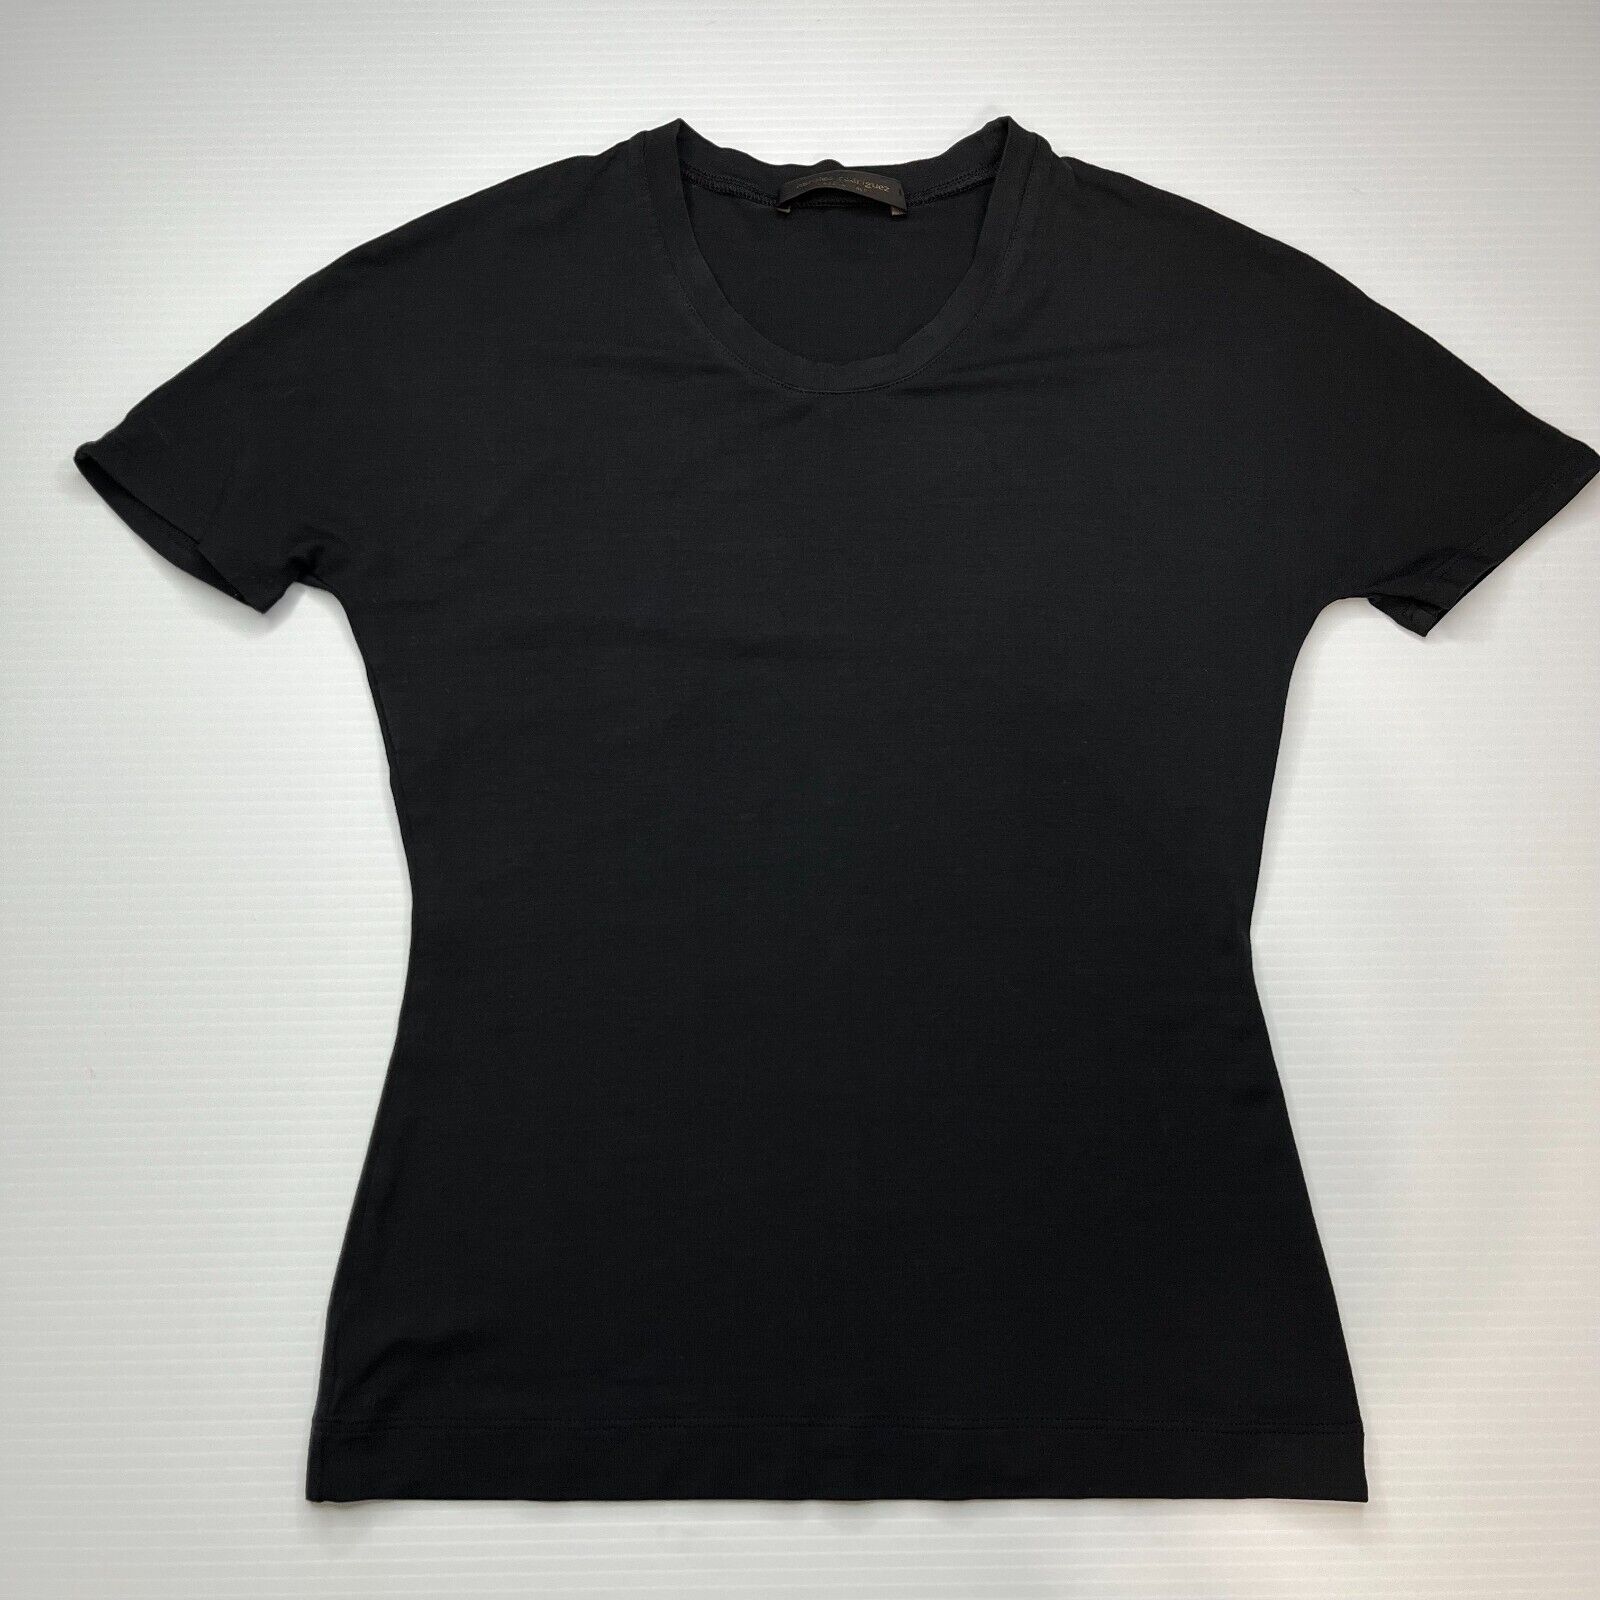 Narciso Rodriguez Womens Basic Black Tshirt Made in Italy Plain Casual Tee